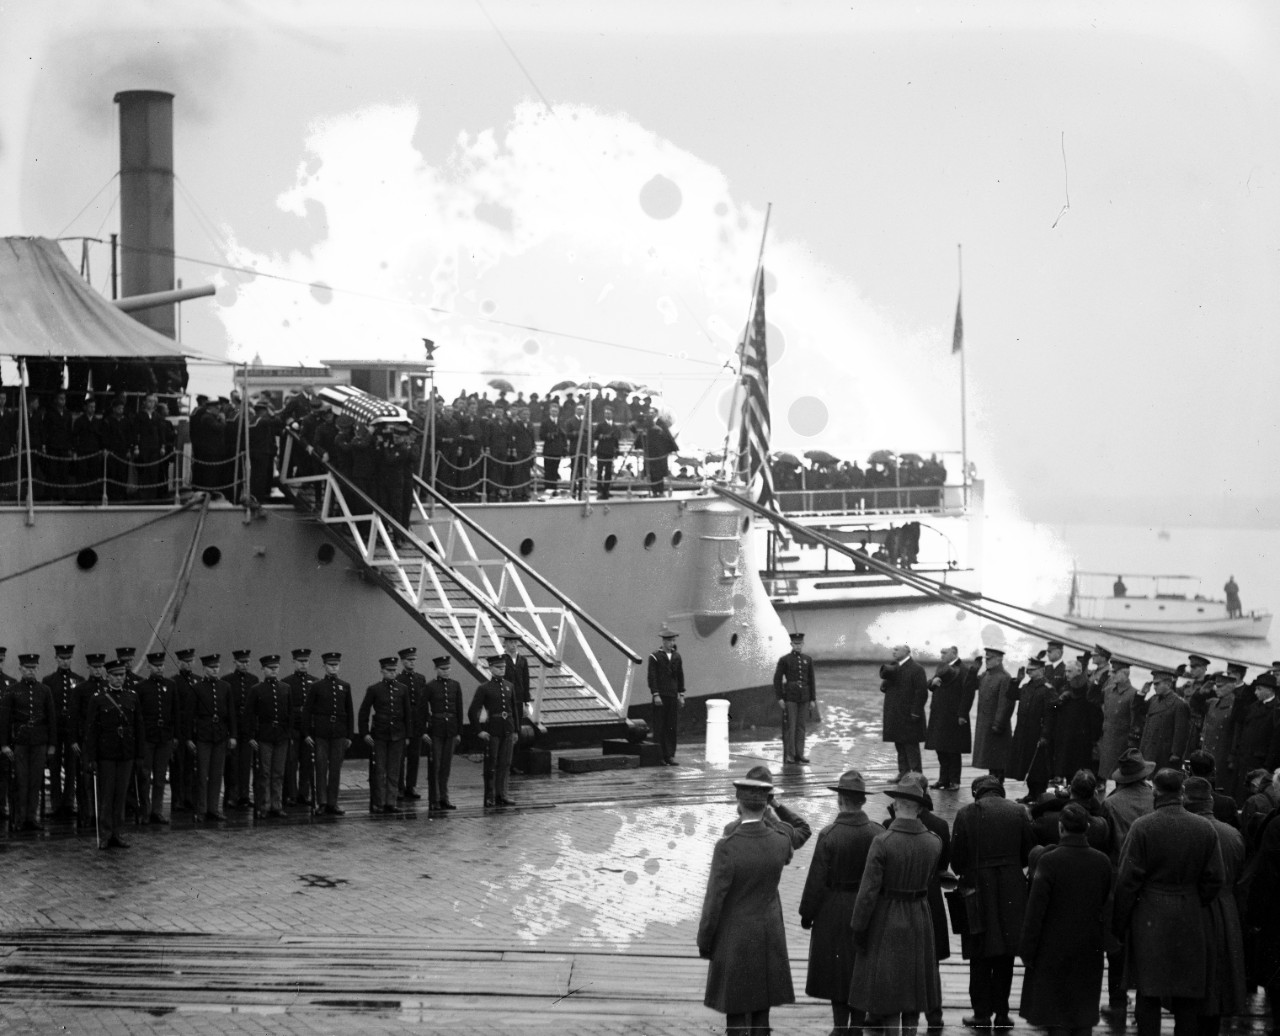 LC-DIG-npcc-05392: USS Olympia (Cruiser #6), arrival of body of The Unknown Soldier, at the Washington Navy Yard, November 9, 1921.